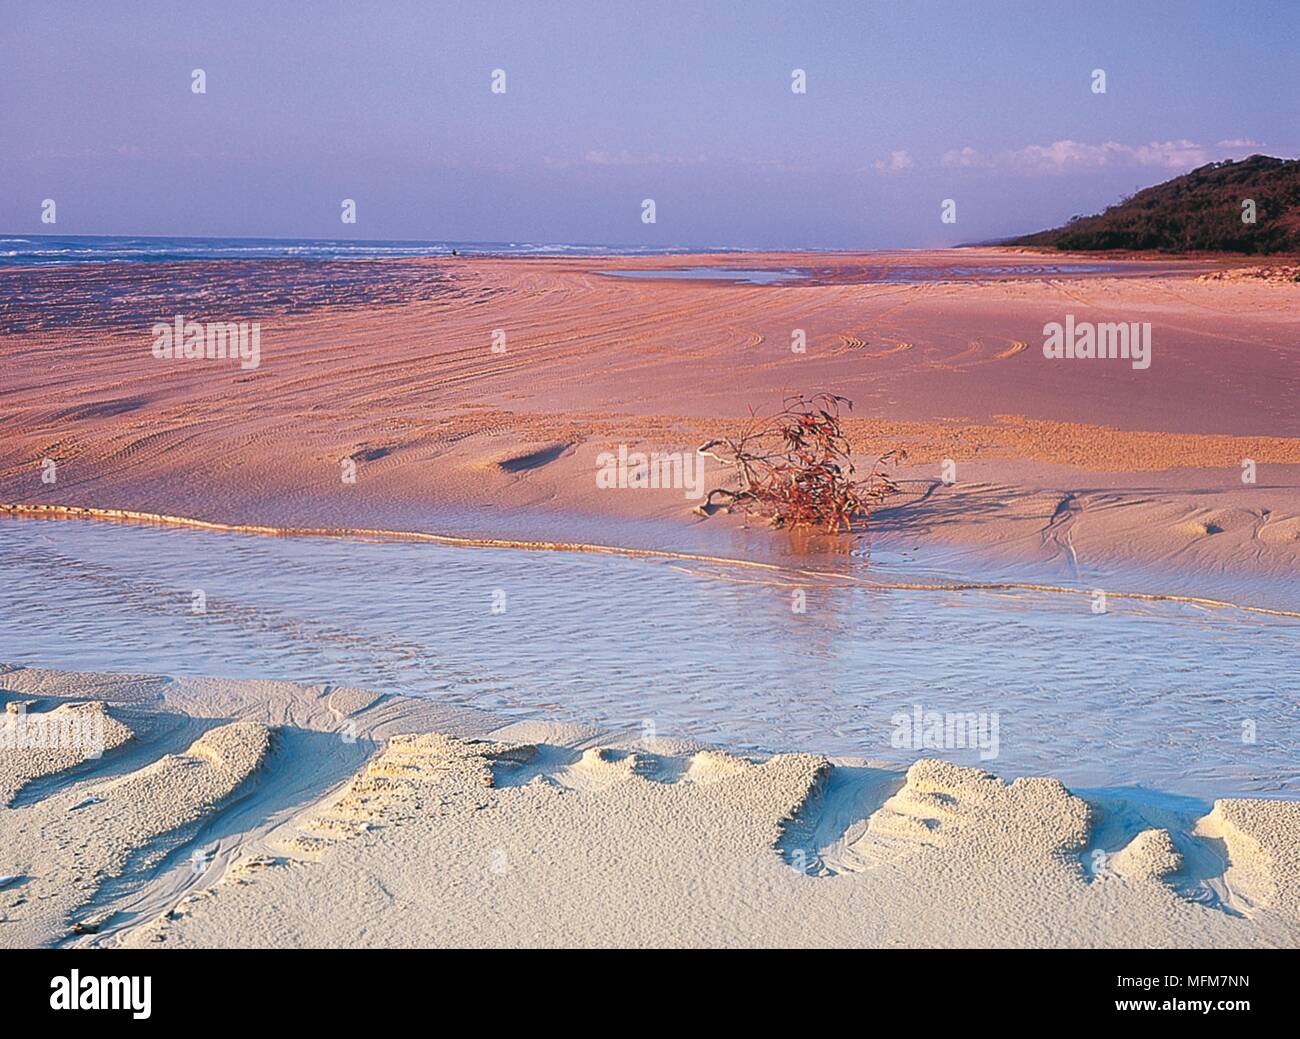 Beach washout, Fraser Island, Queensland, Australia.  Morning sunlight strikes the tyre tracks of 4WD vehicles where they've crossed a washout on the Stock Photo